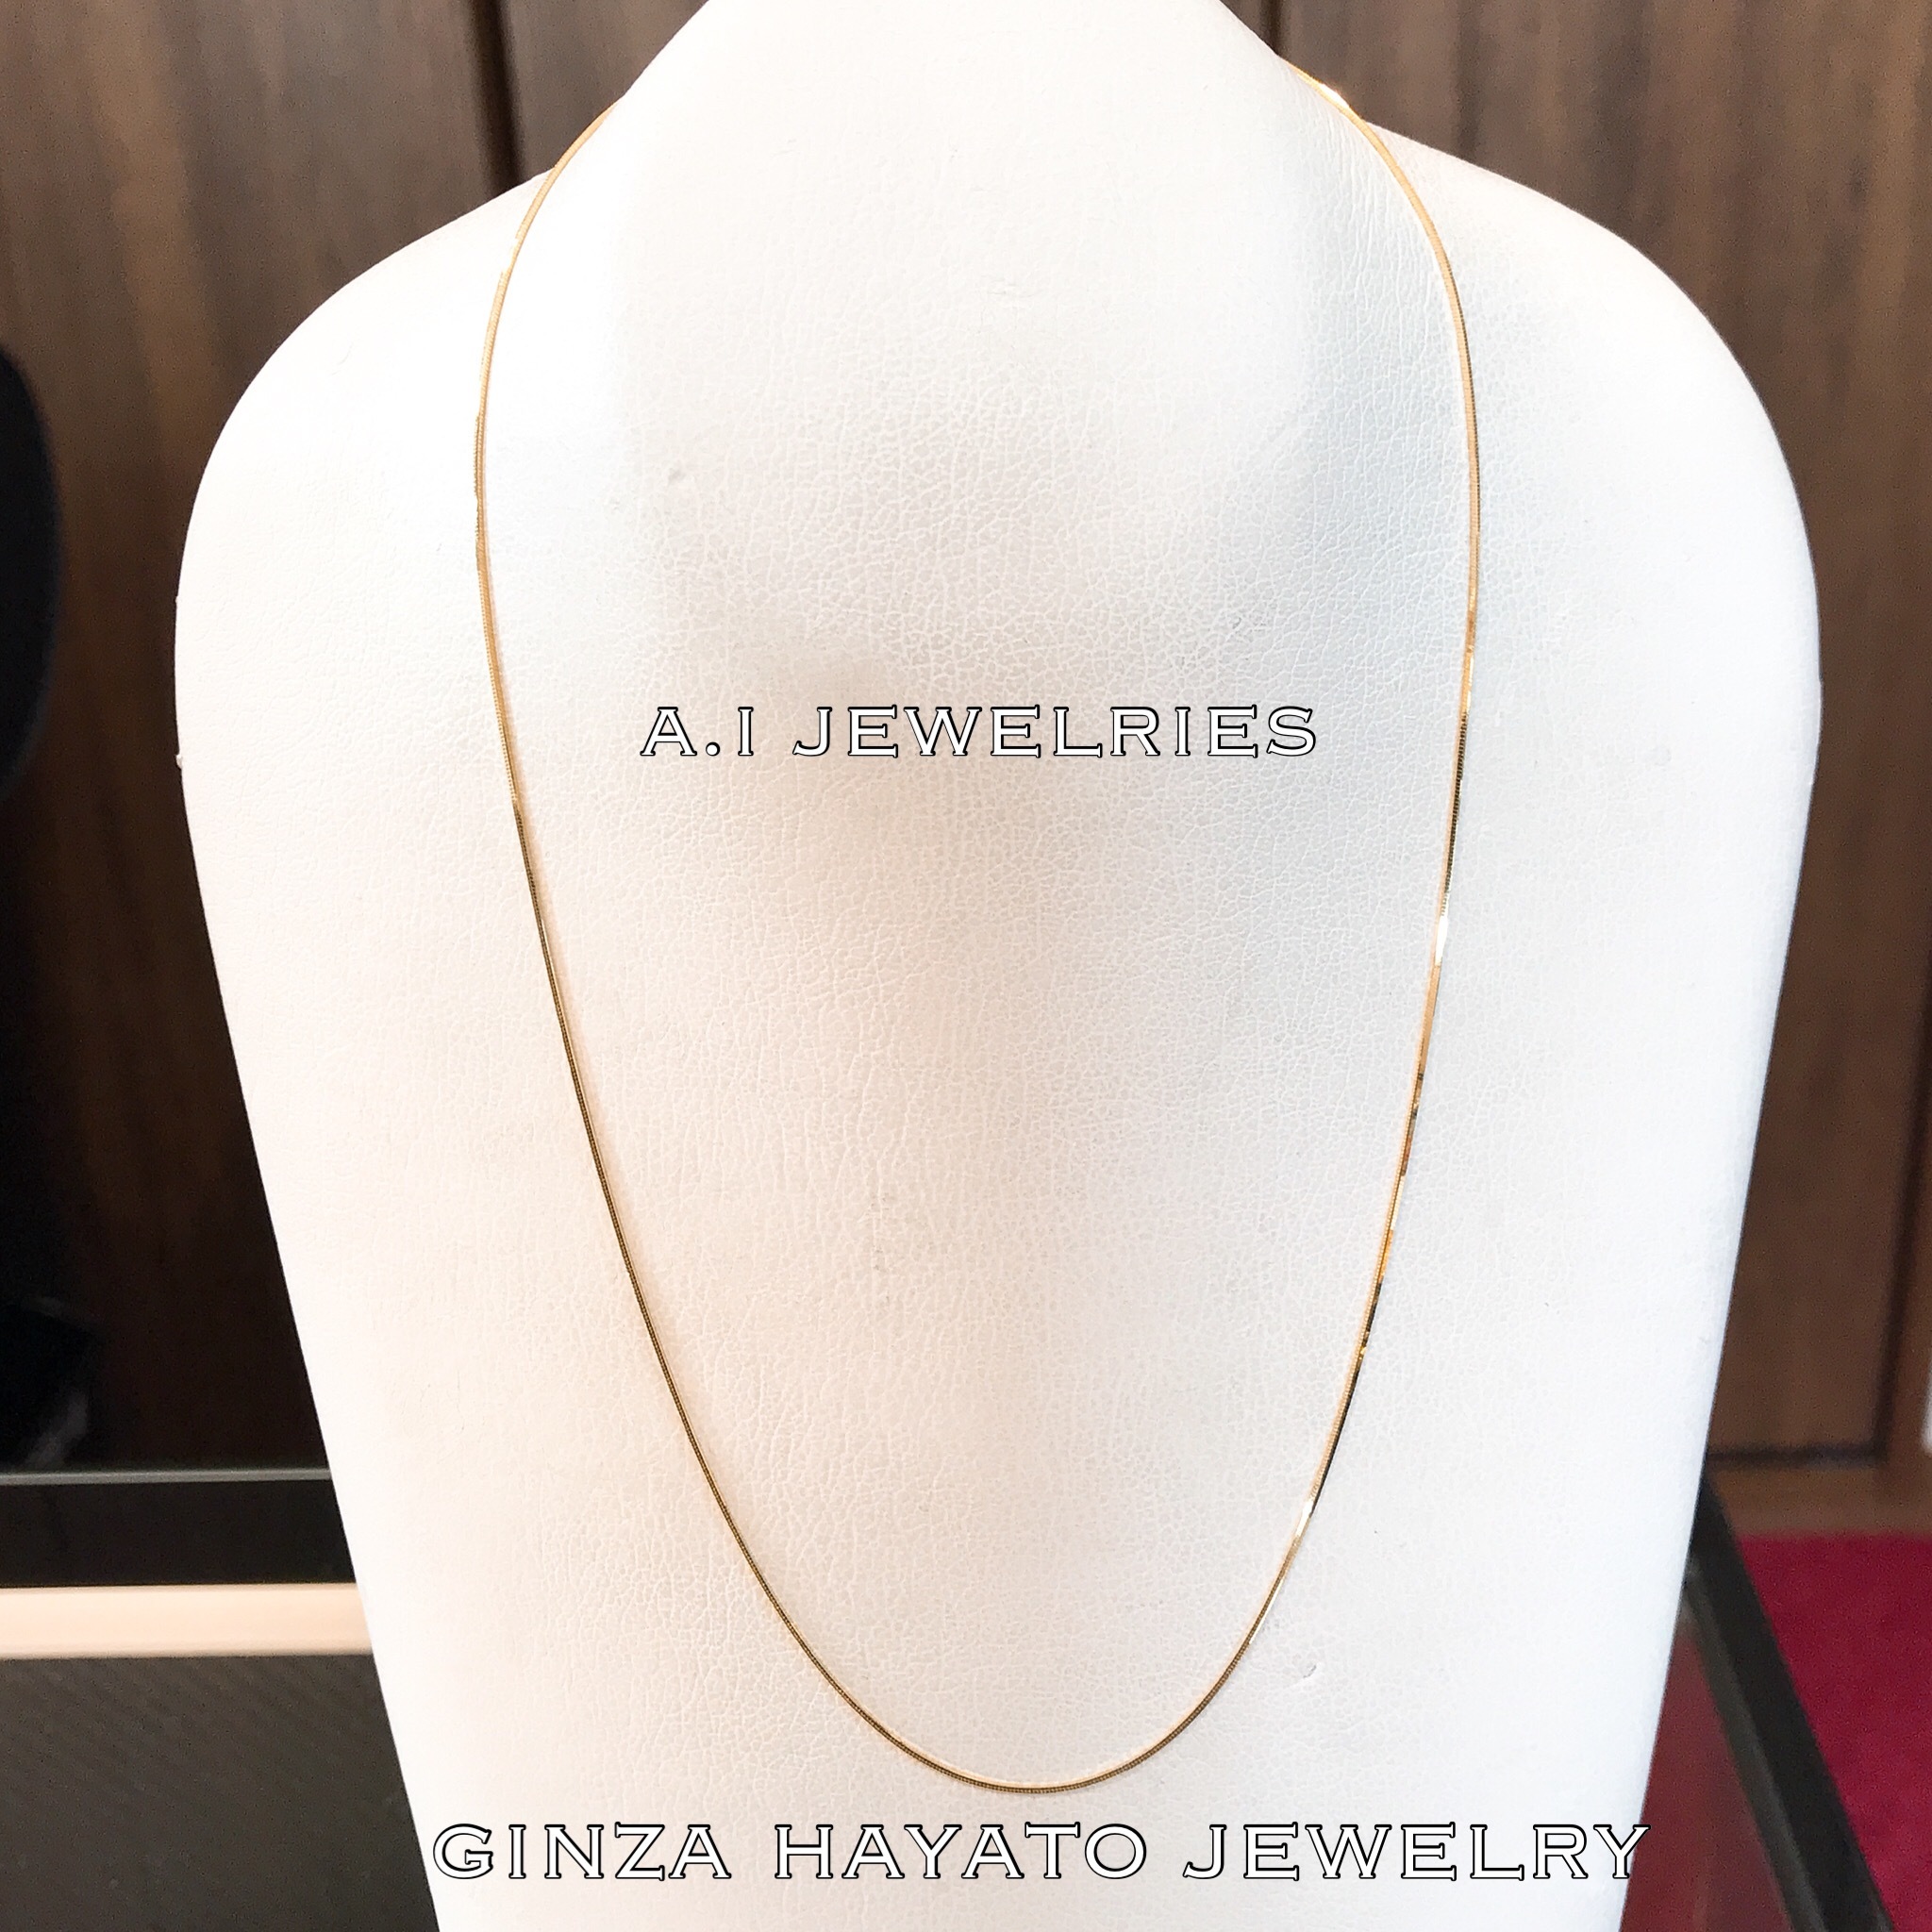 K18 18金 ソフト スネーク チェーン ネックレス Soft Snake Chain Necklace 40cm レディース A I Jewelries エイアイジュエリーズ